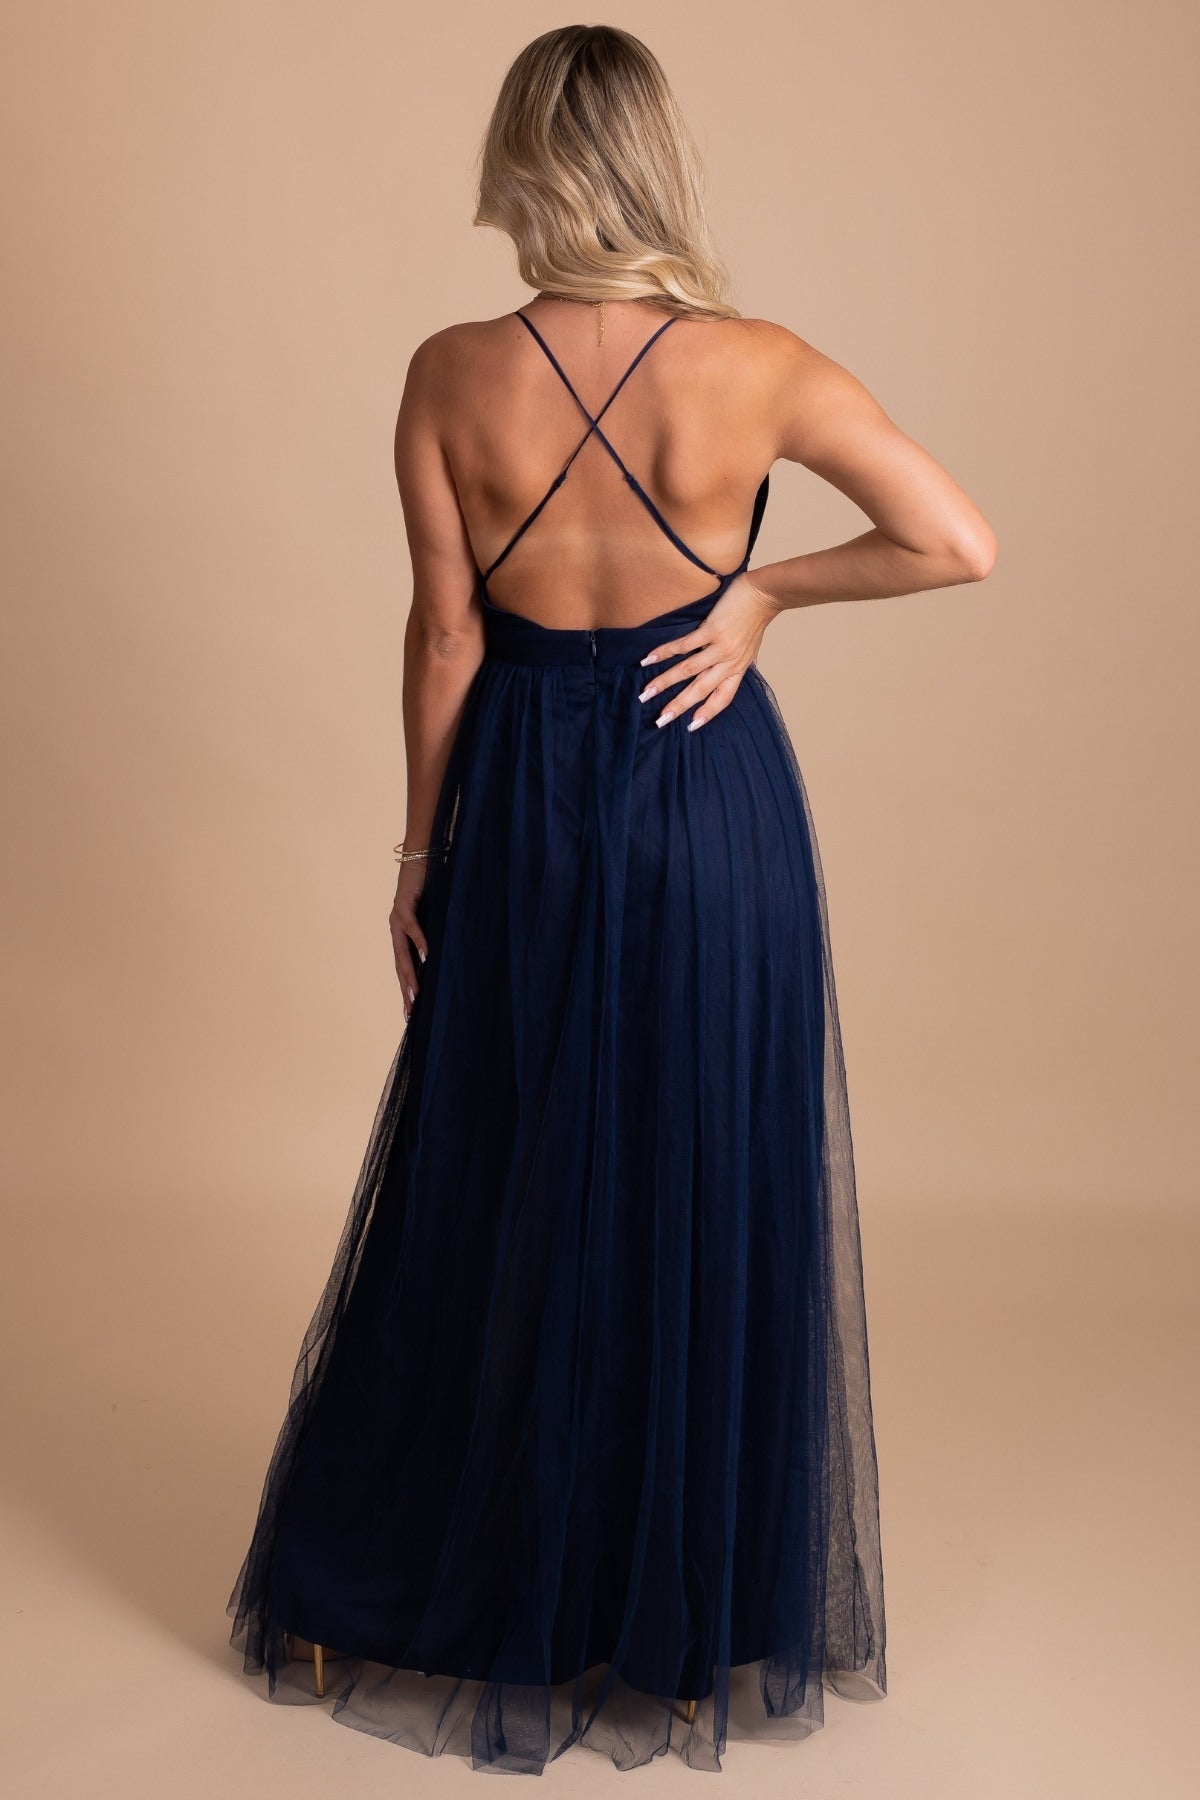 Formal Tulle Dress with Criss-Cross Spaghetti Straps in Navy Dark Blue